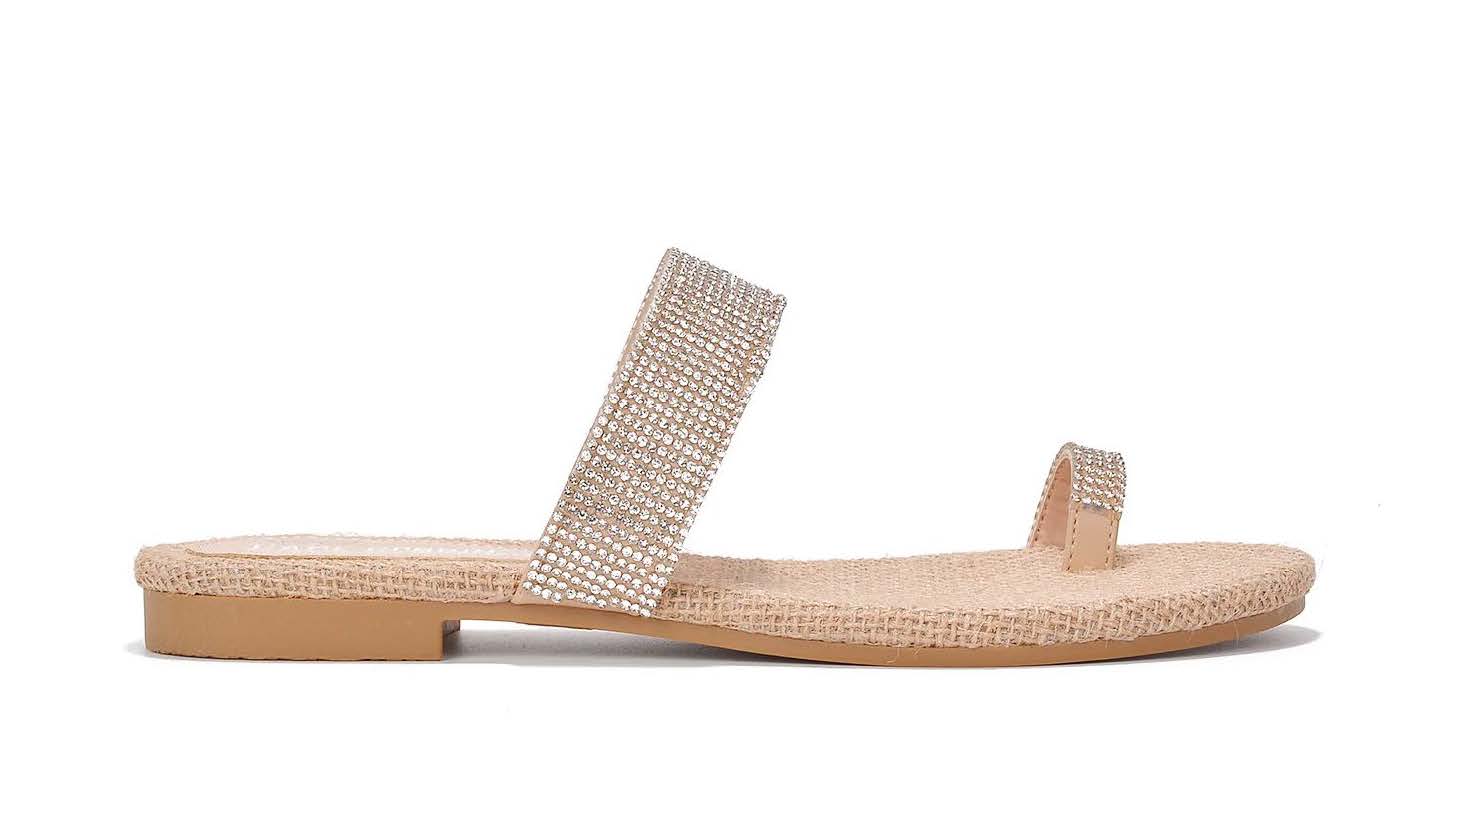 A flat tan sandal with silver sparkling gems along straps and toe ring strap.